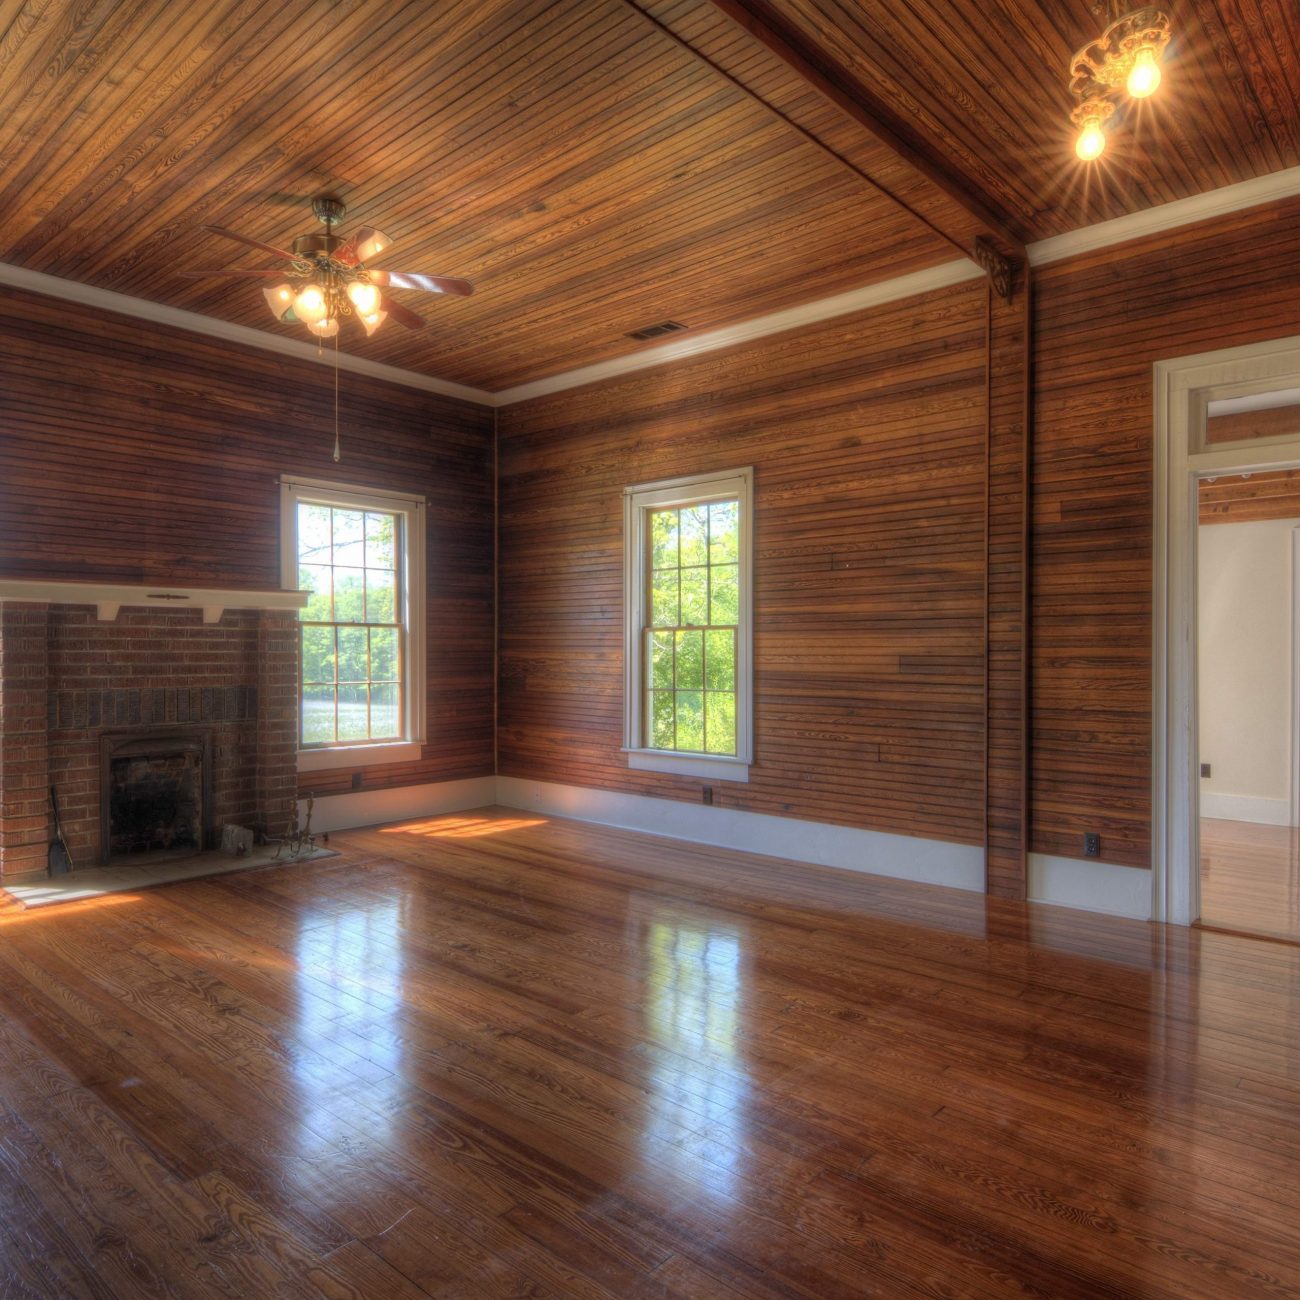 Wood Wall Paneling To Add Texture, Laminate Flooring With Wood Paneling